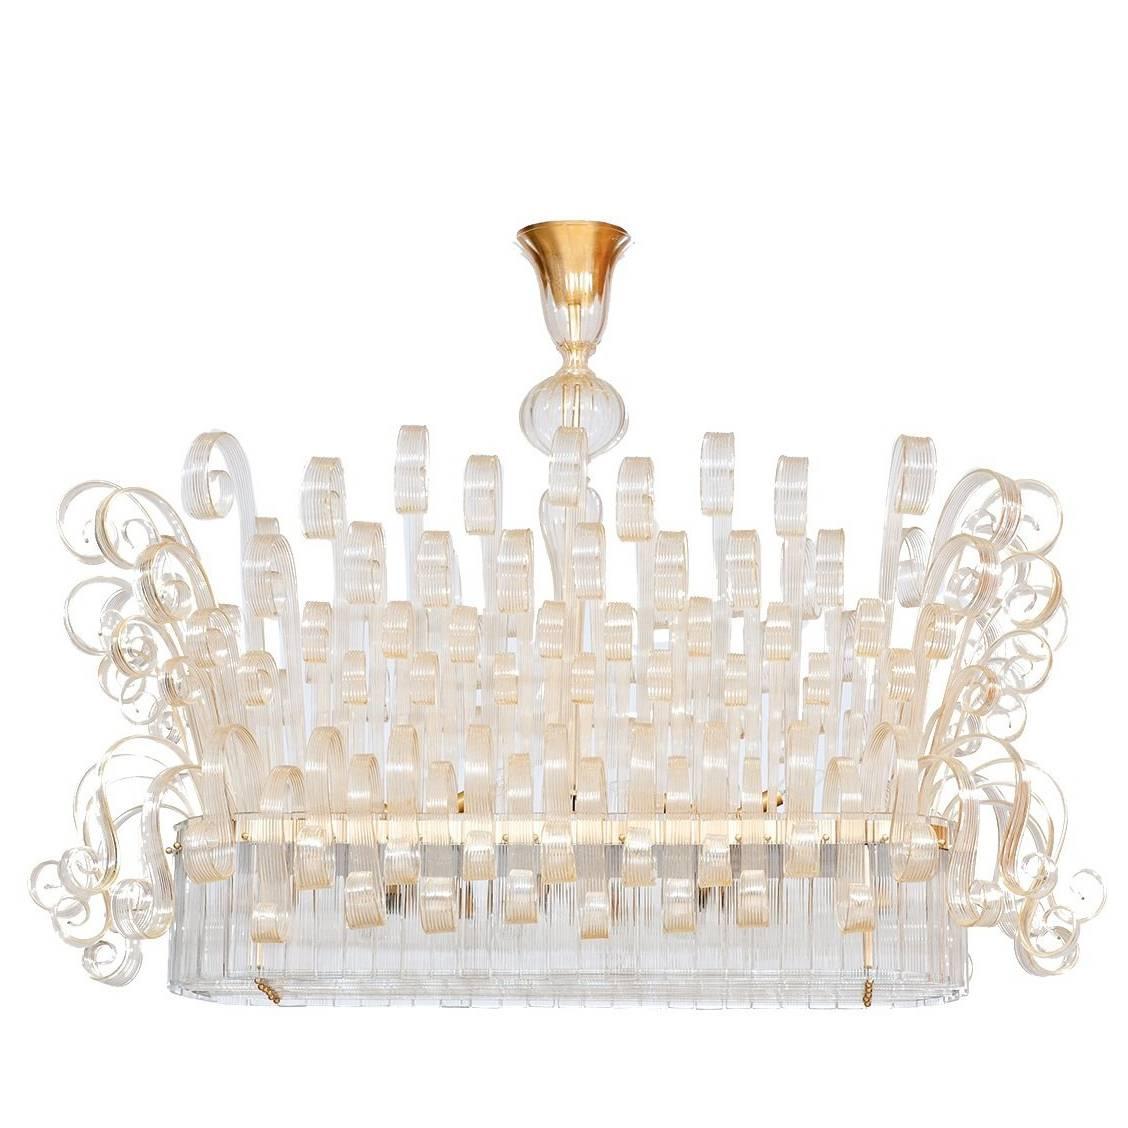 Limited Edition Italian Chandelier with 24-Karat Gold